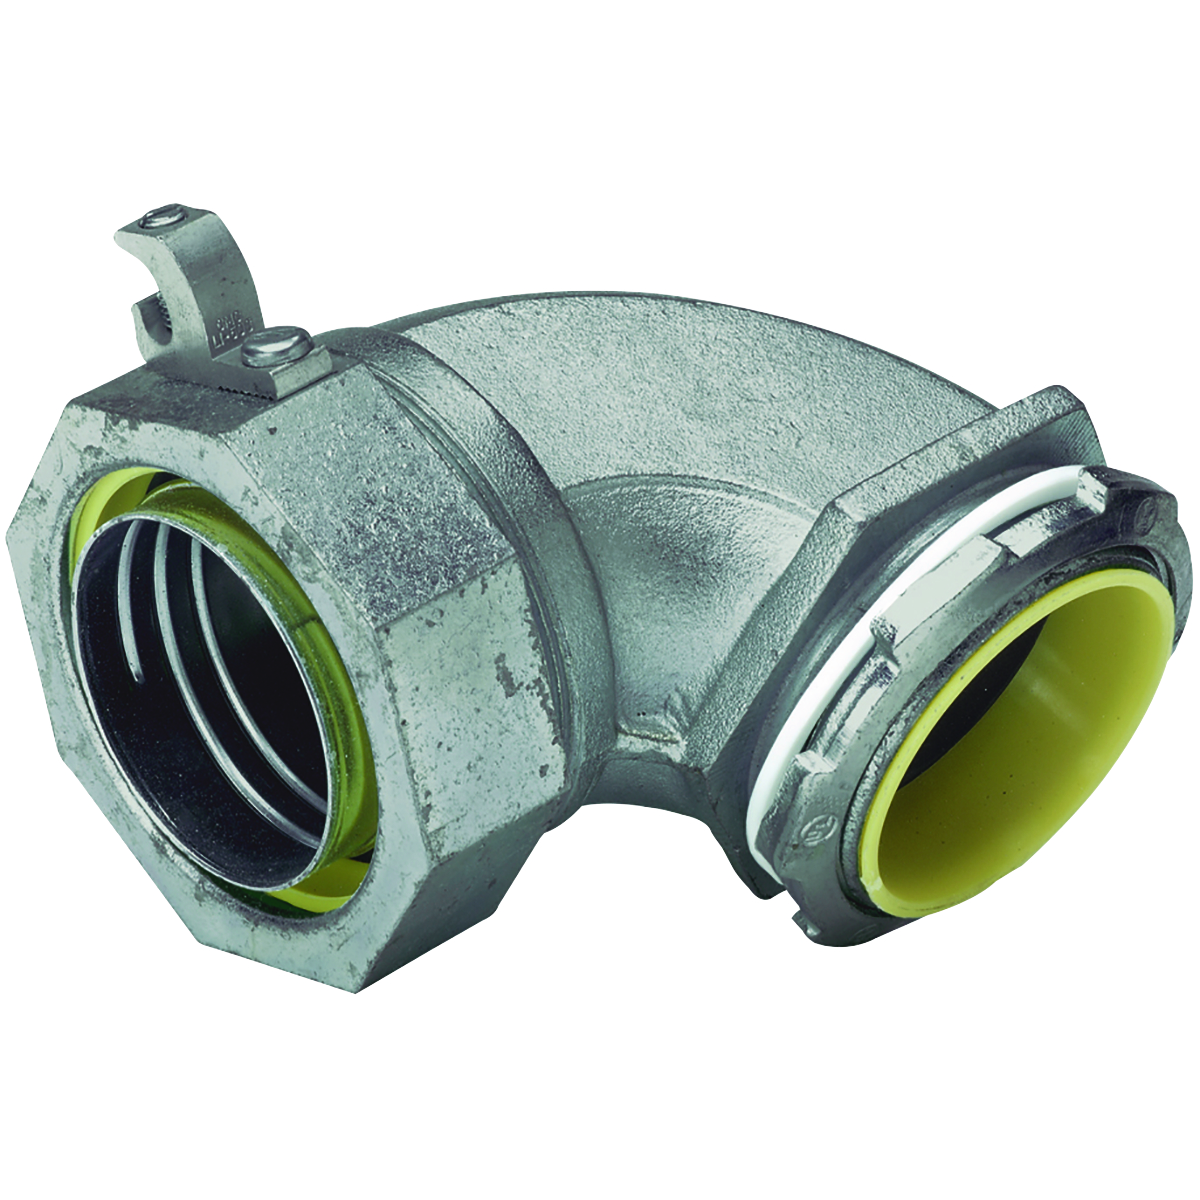 K SERIES FITTINGS - GROUNDED LIQUIDTIGHT CONNECTORS - K LIQUIDTIGHTGROUNDING STYLE - 90 DEGREE INSULATED - NPT SIZE 1-1/2 IN